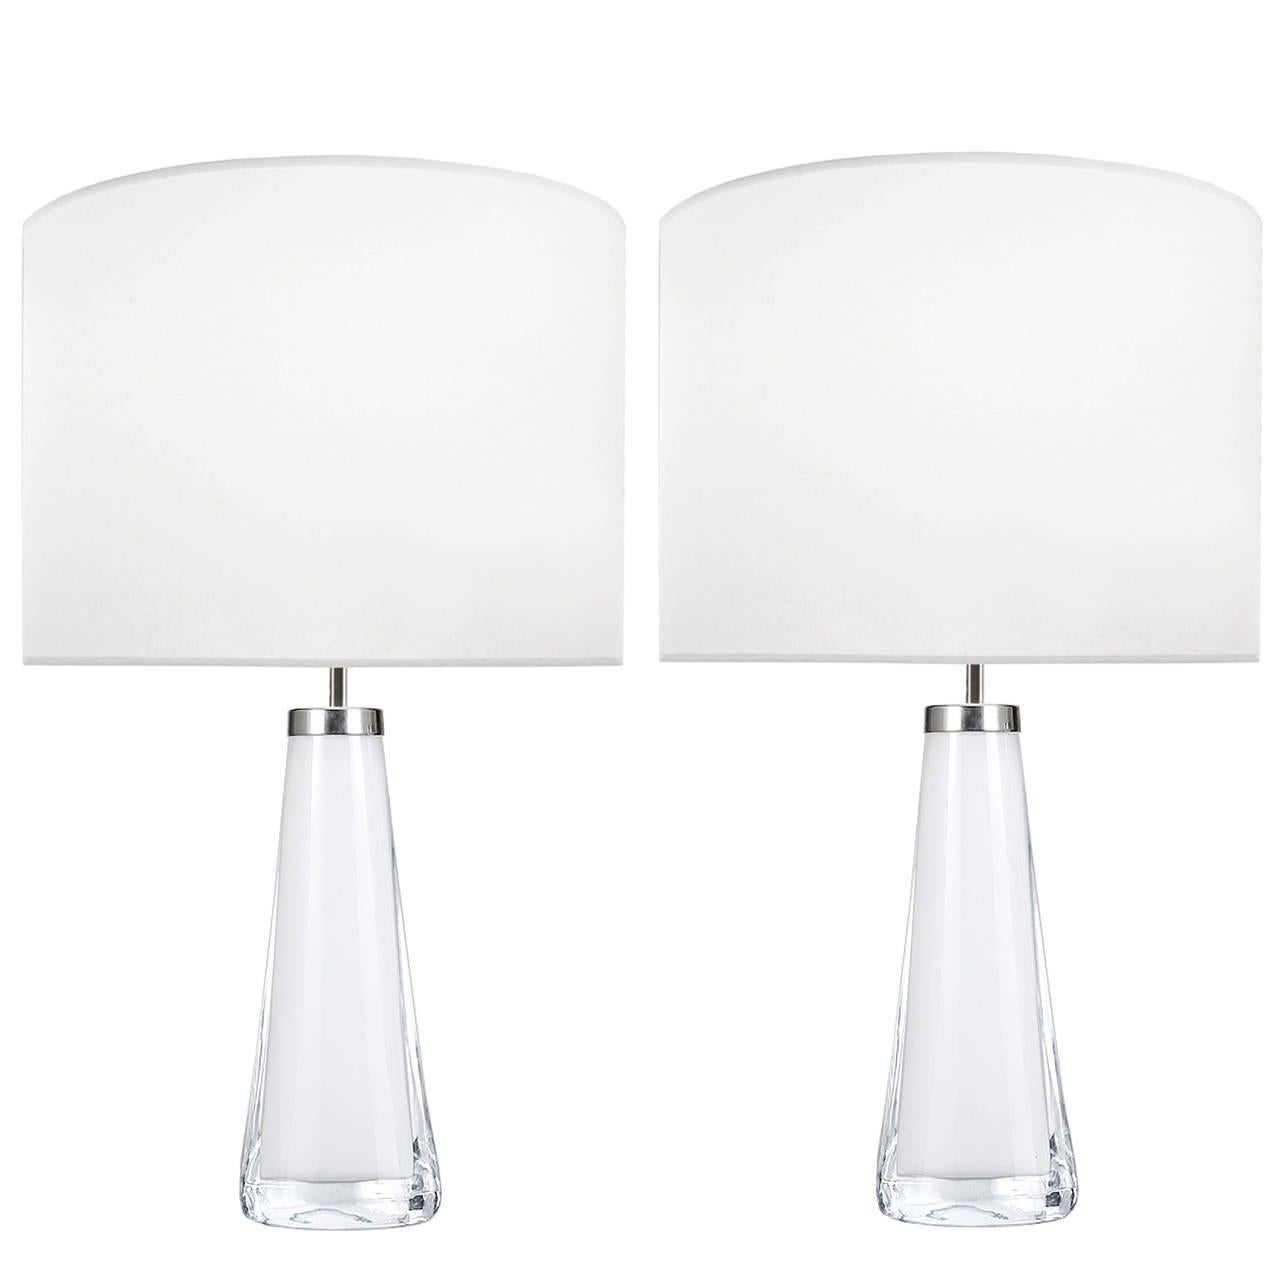 A pair of white glass lamps with thick clear glass casing with nickel hardware by Nils Landberg for Orrefors.

Swedish, Circa 1950's

Lamp Shades Are Not Included.

If you are interested in Lamp Shades, please email The Craig Van Den Brulle Design